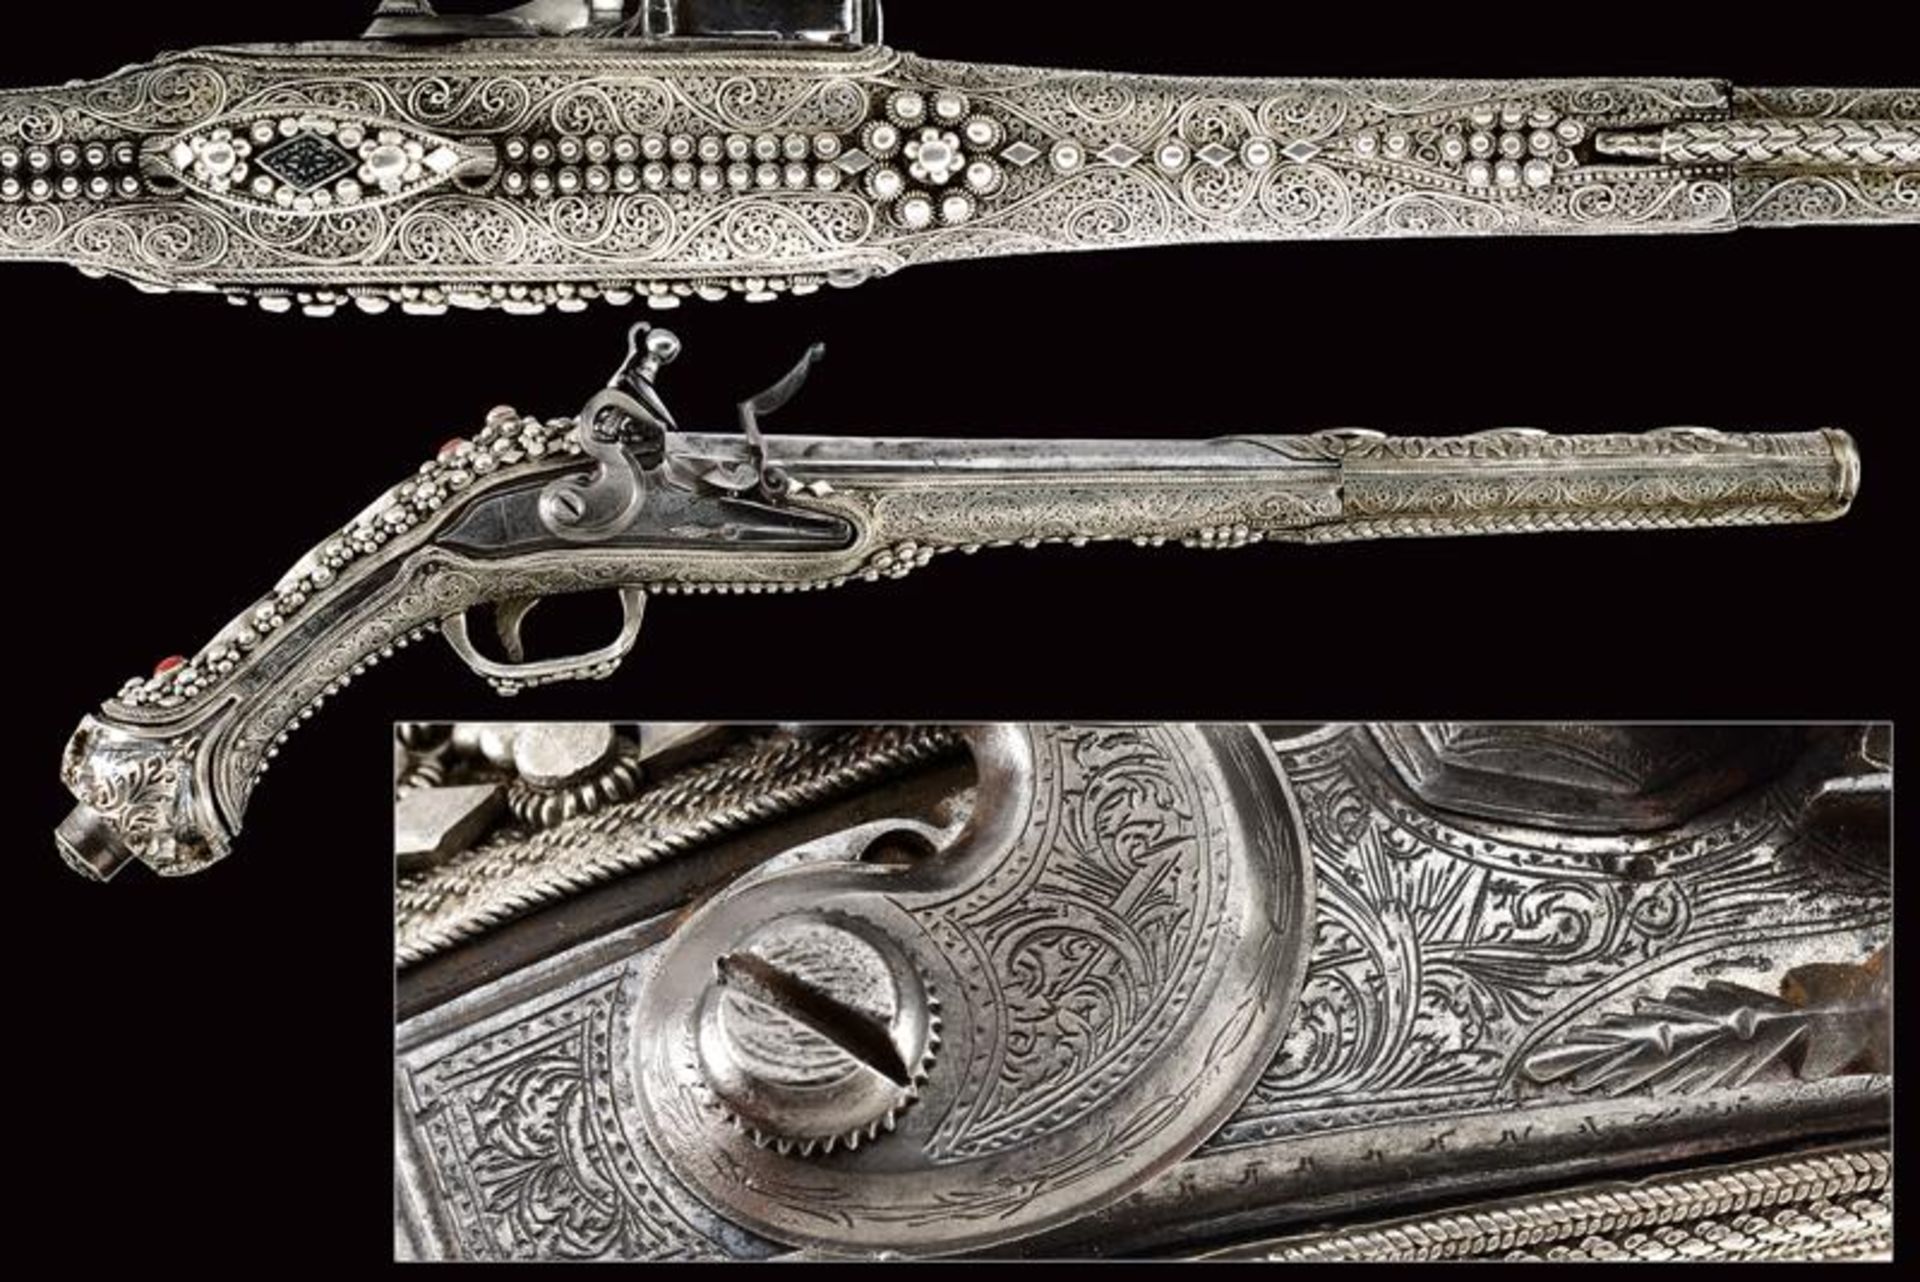 A magnificent silver-mounted flintlock holster pistol in Ali Pasha style